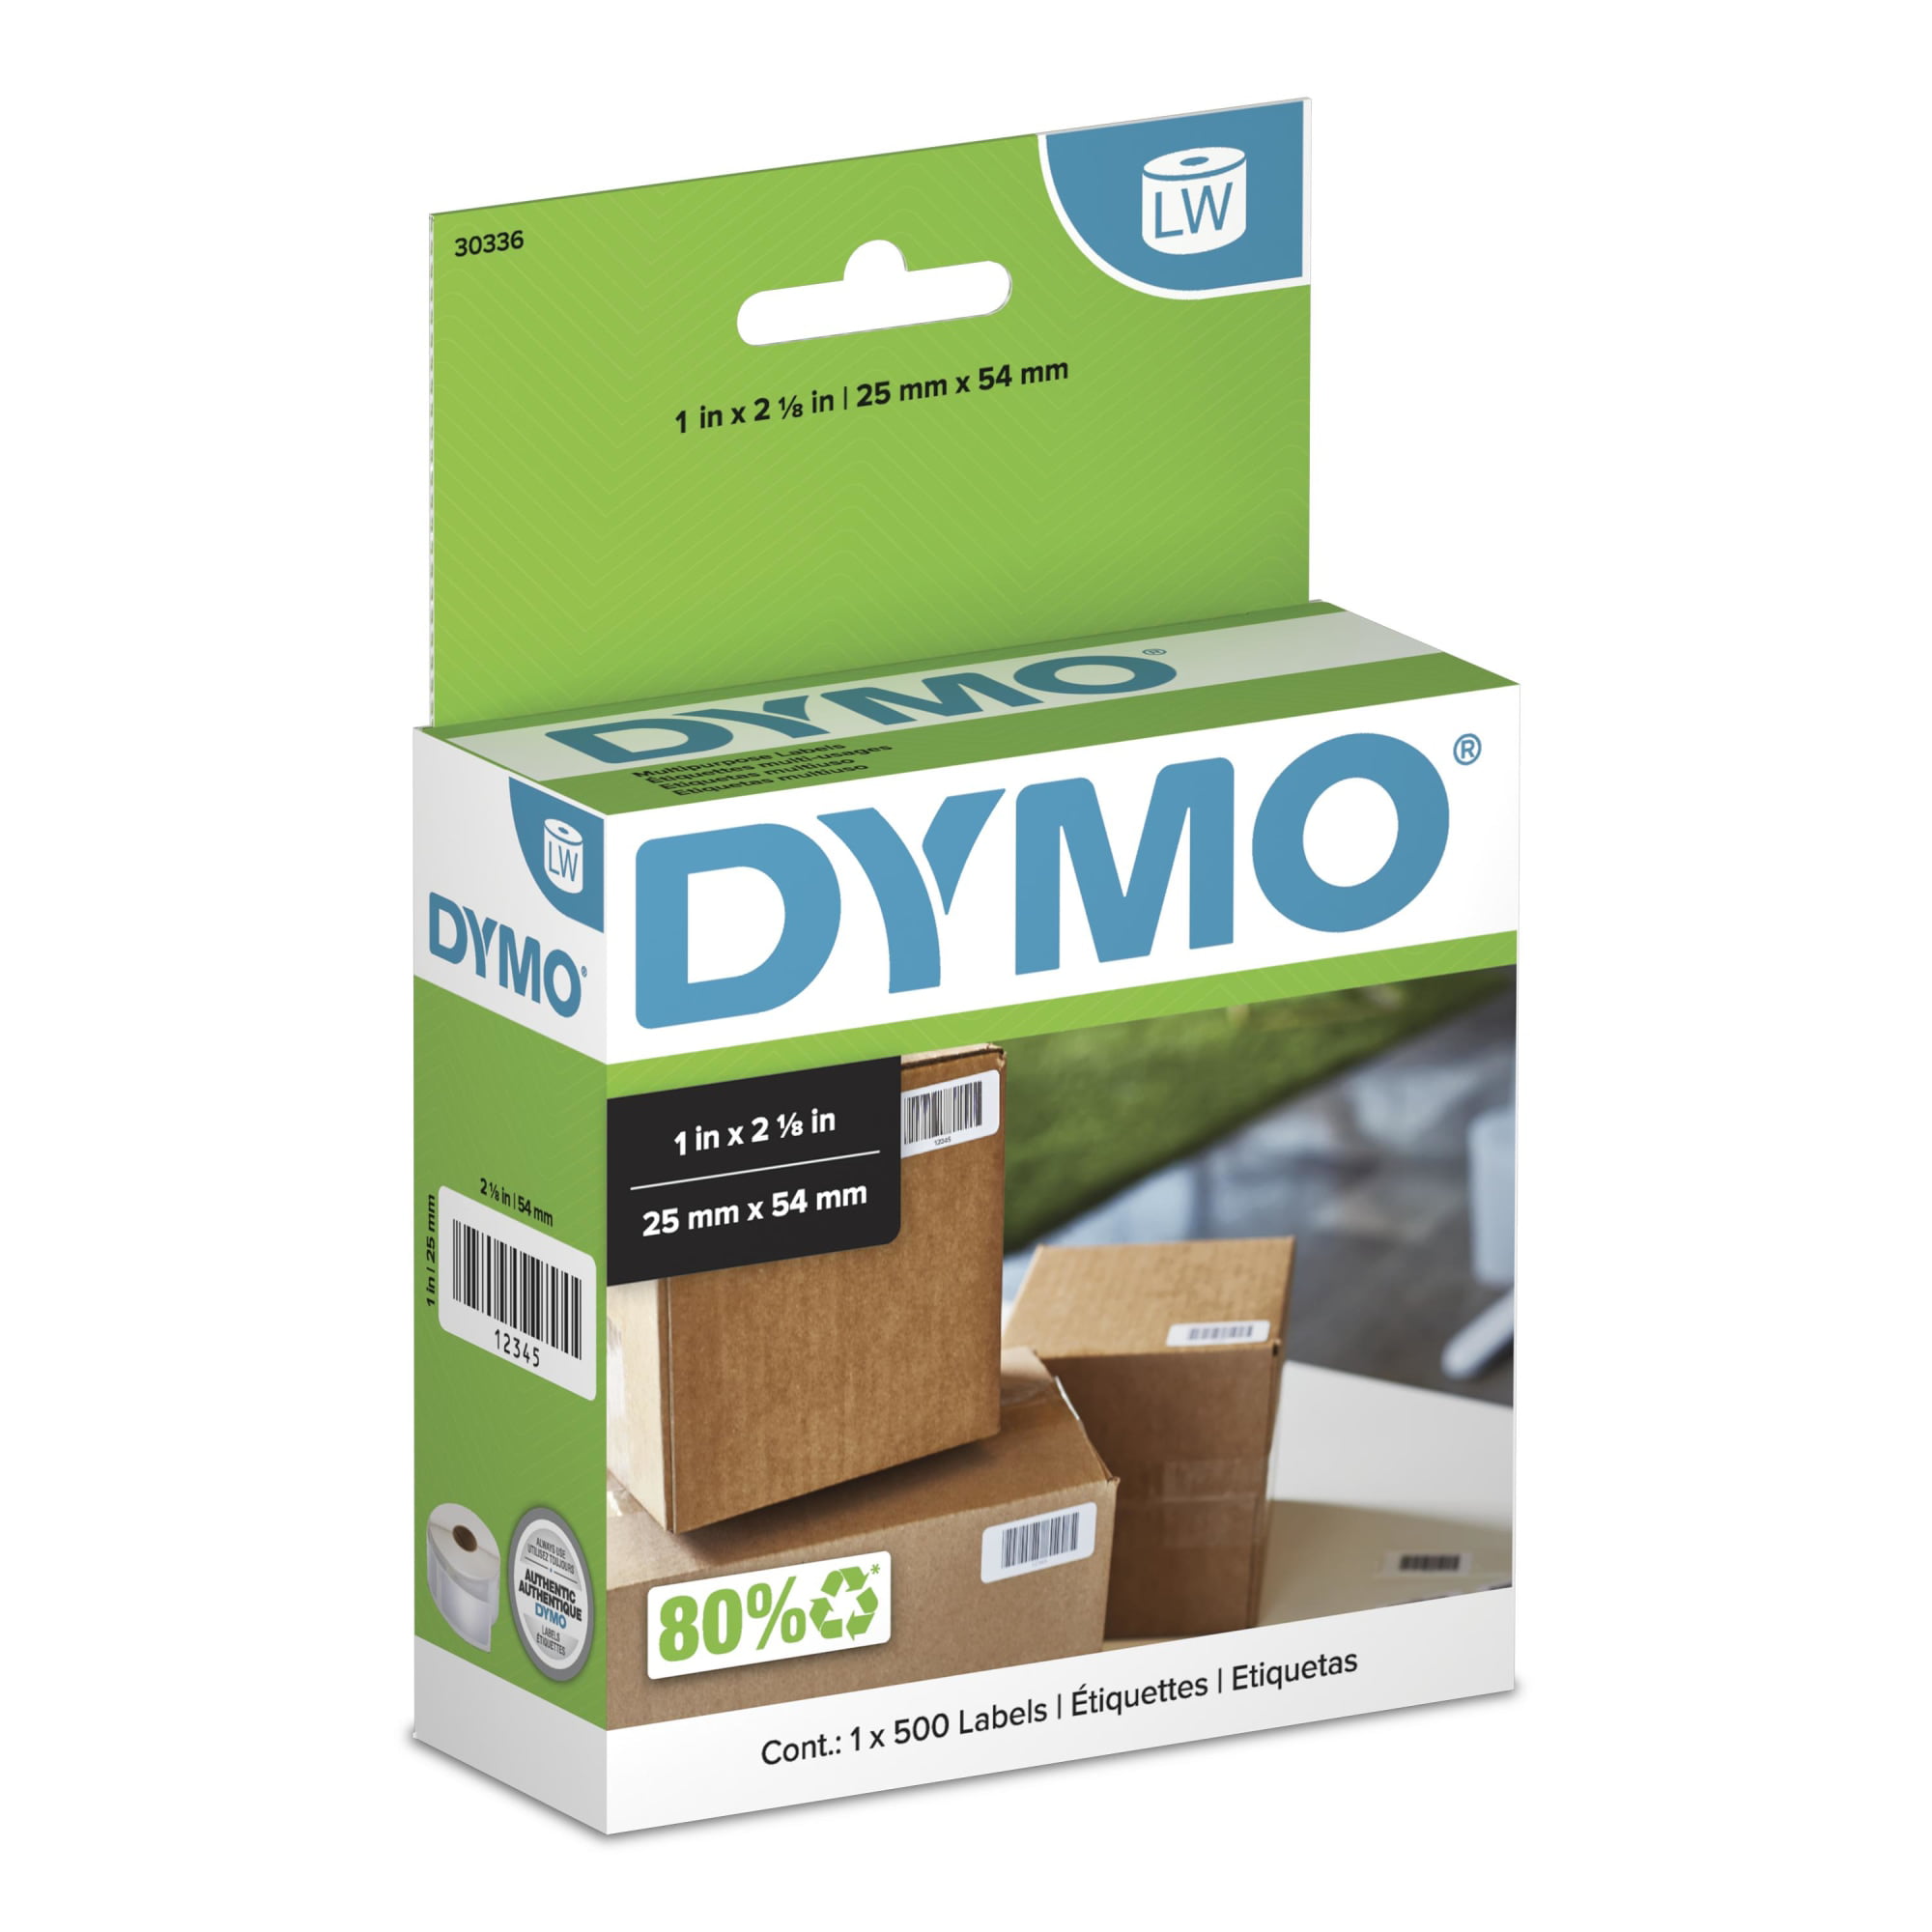 40 Rolls of 500 Multipurpose Labels in Cartons for DYMO LabelWriters 30336 